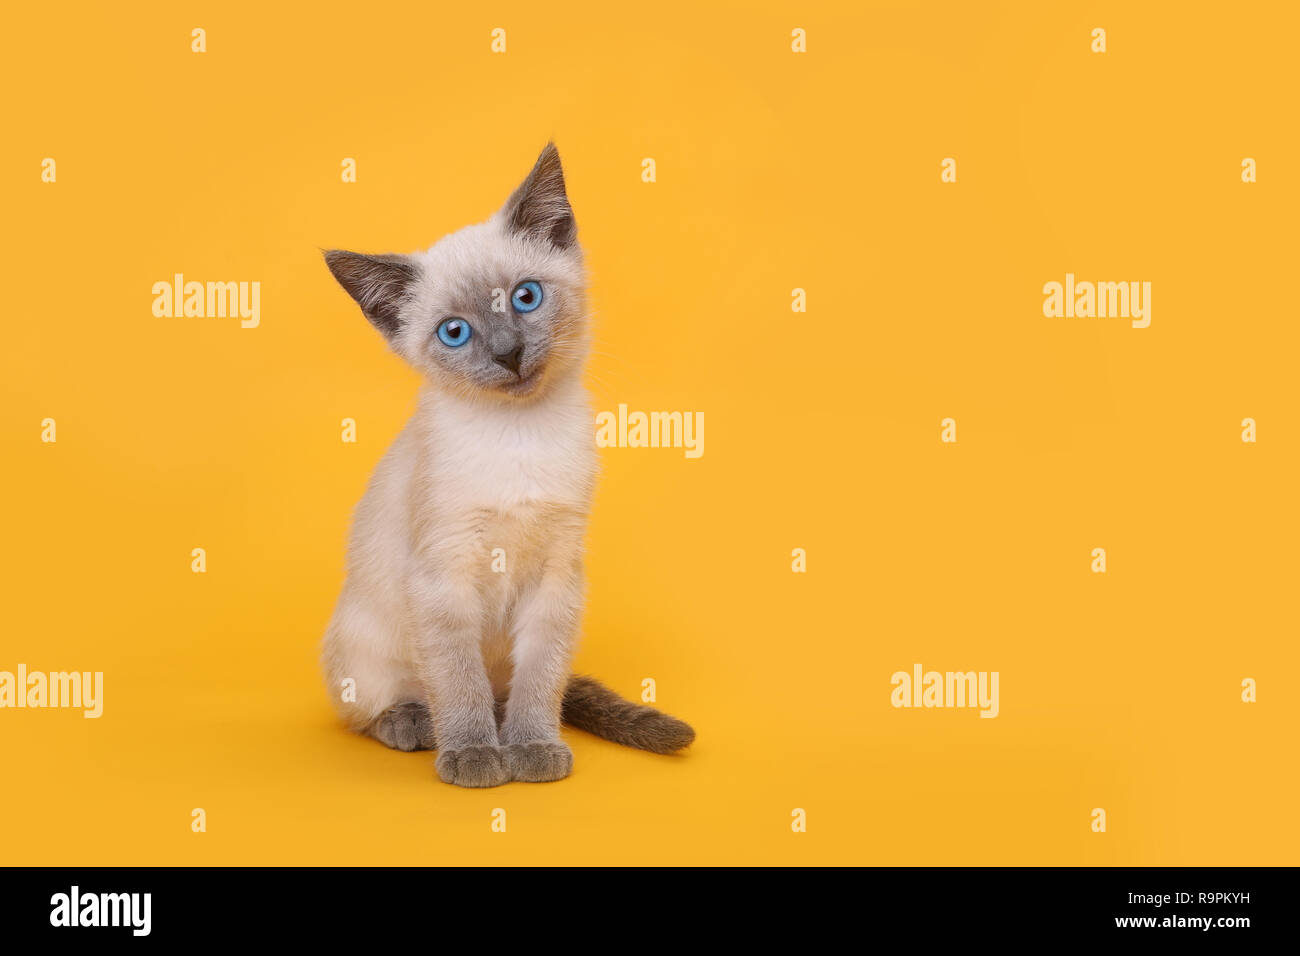 Cute Siamese Kitten Smiling With Head Tilted on Yellow Background Stock Photo